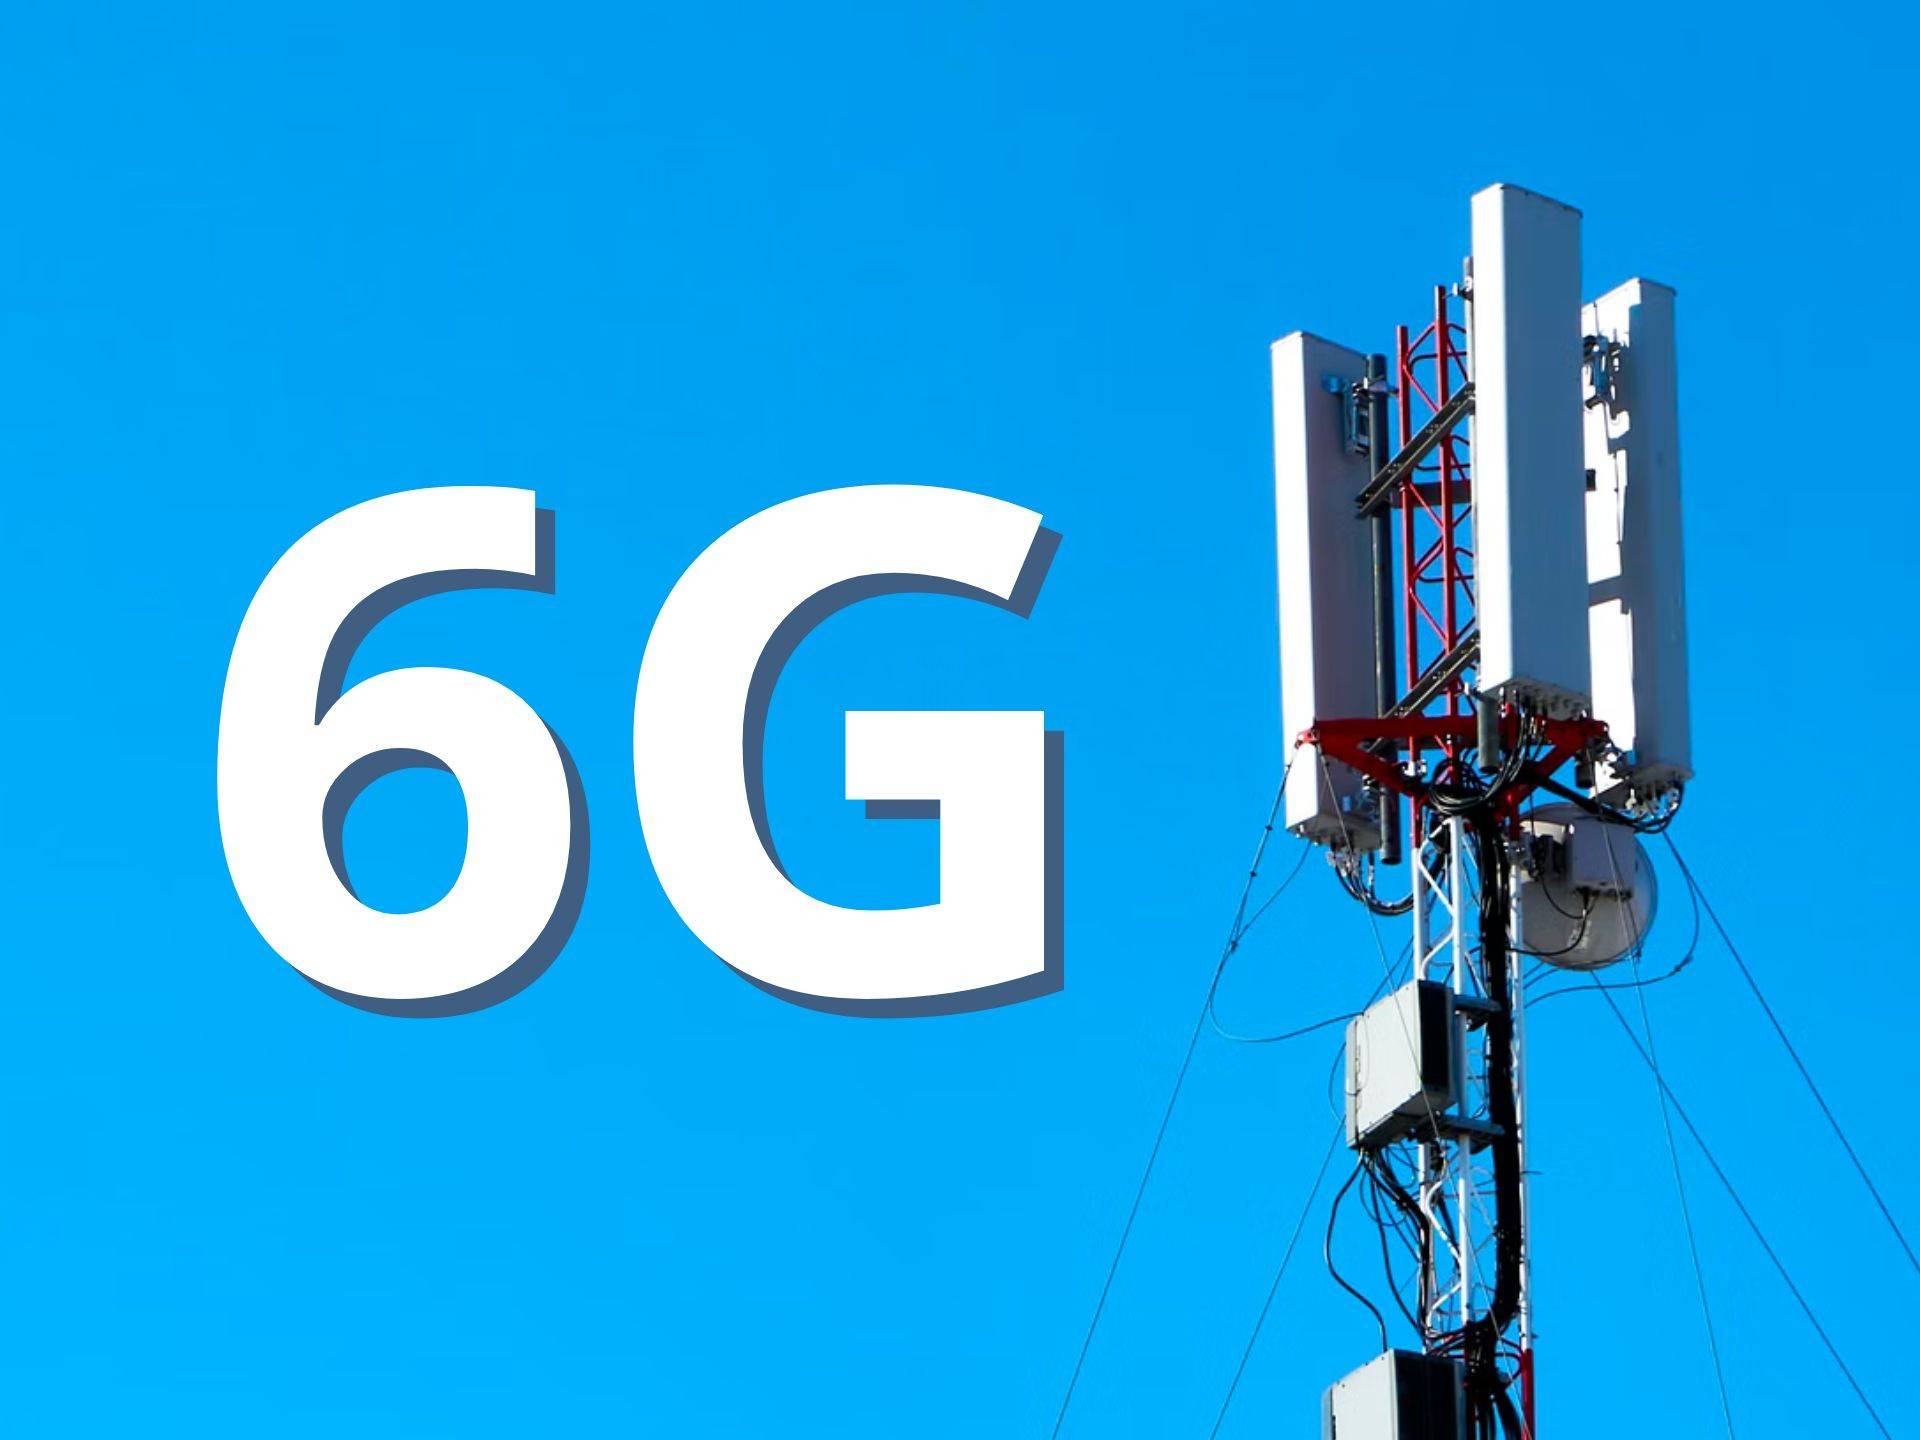 Cell tower with "6G" text on the left side